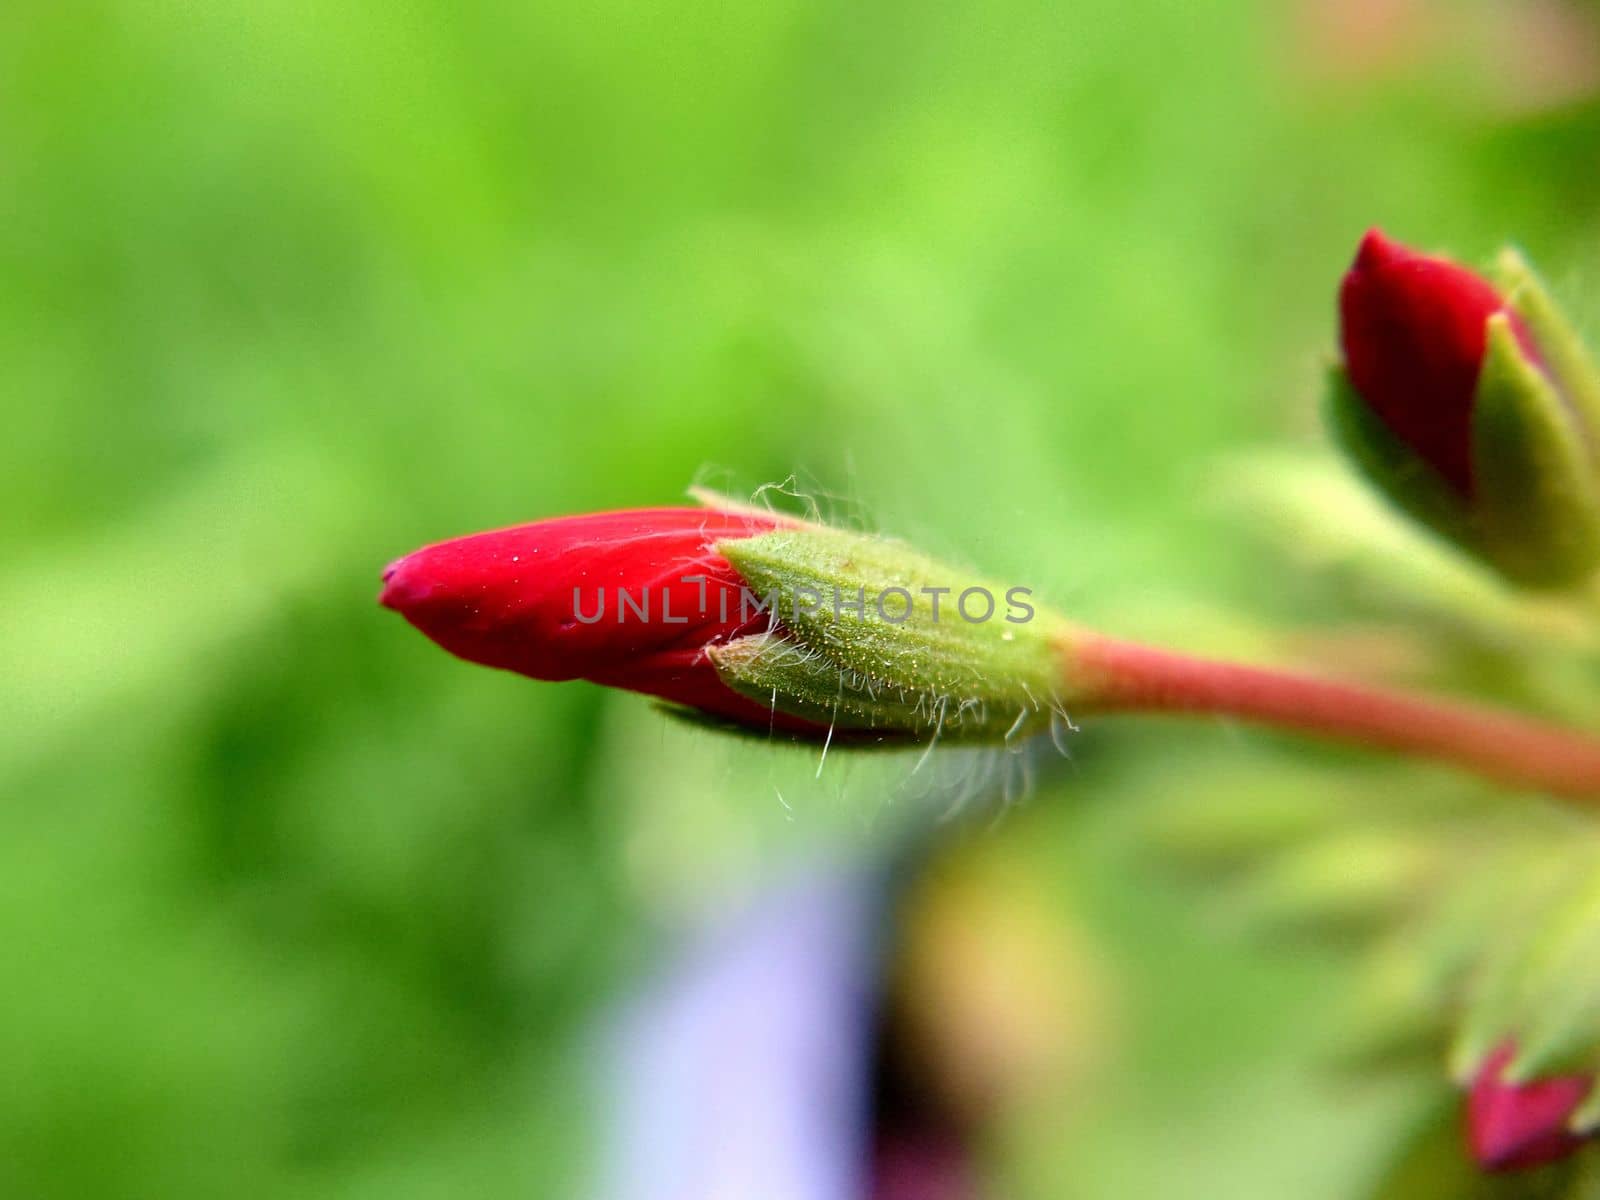 Unopened long buds of a red flower on a summer day by Mastak80